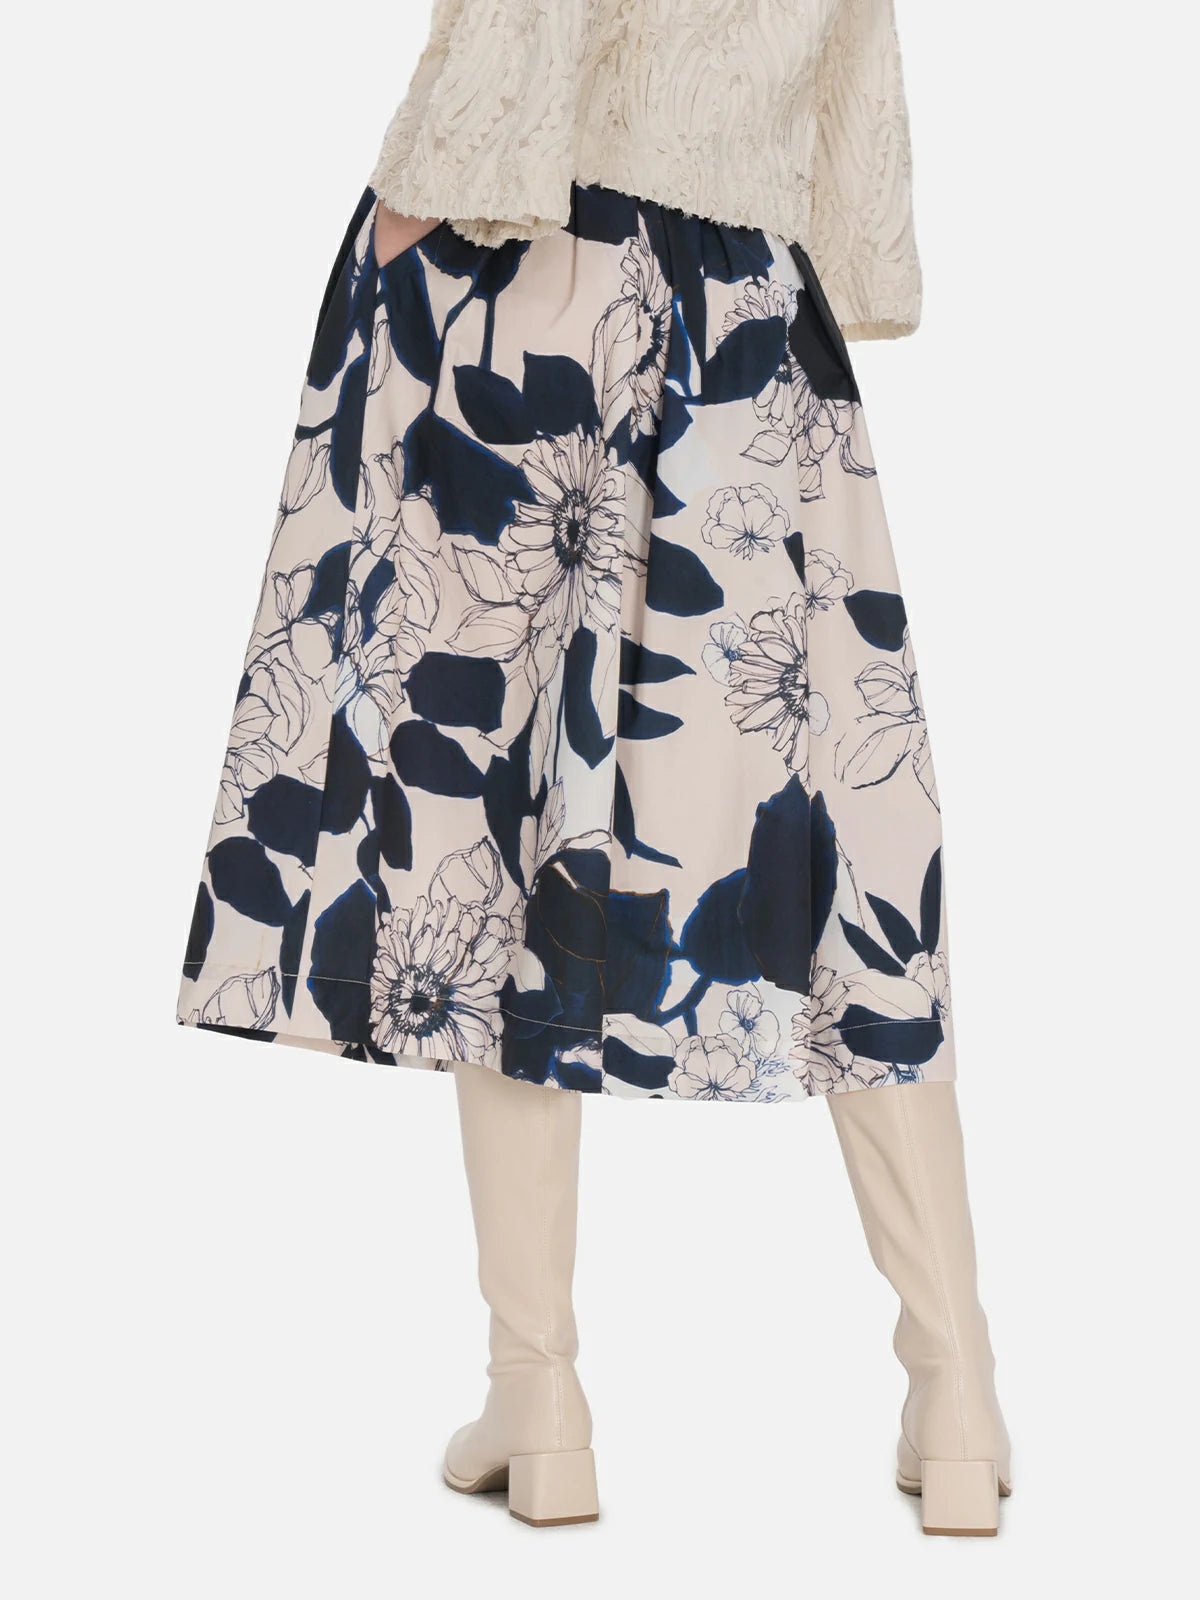 Comfortable A-line midi skirt with a stylish high-waisted silhouette, ideal for all-day wear